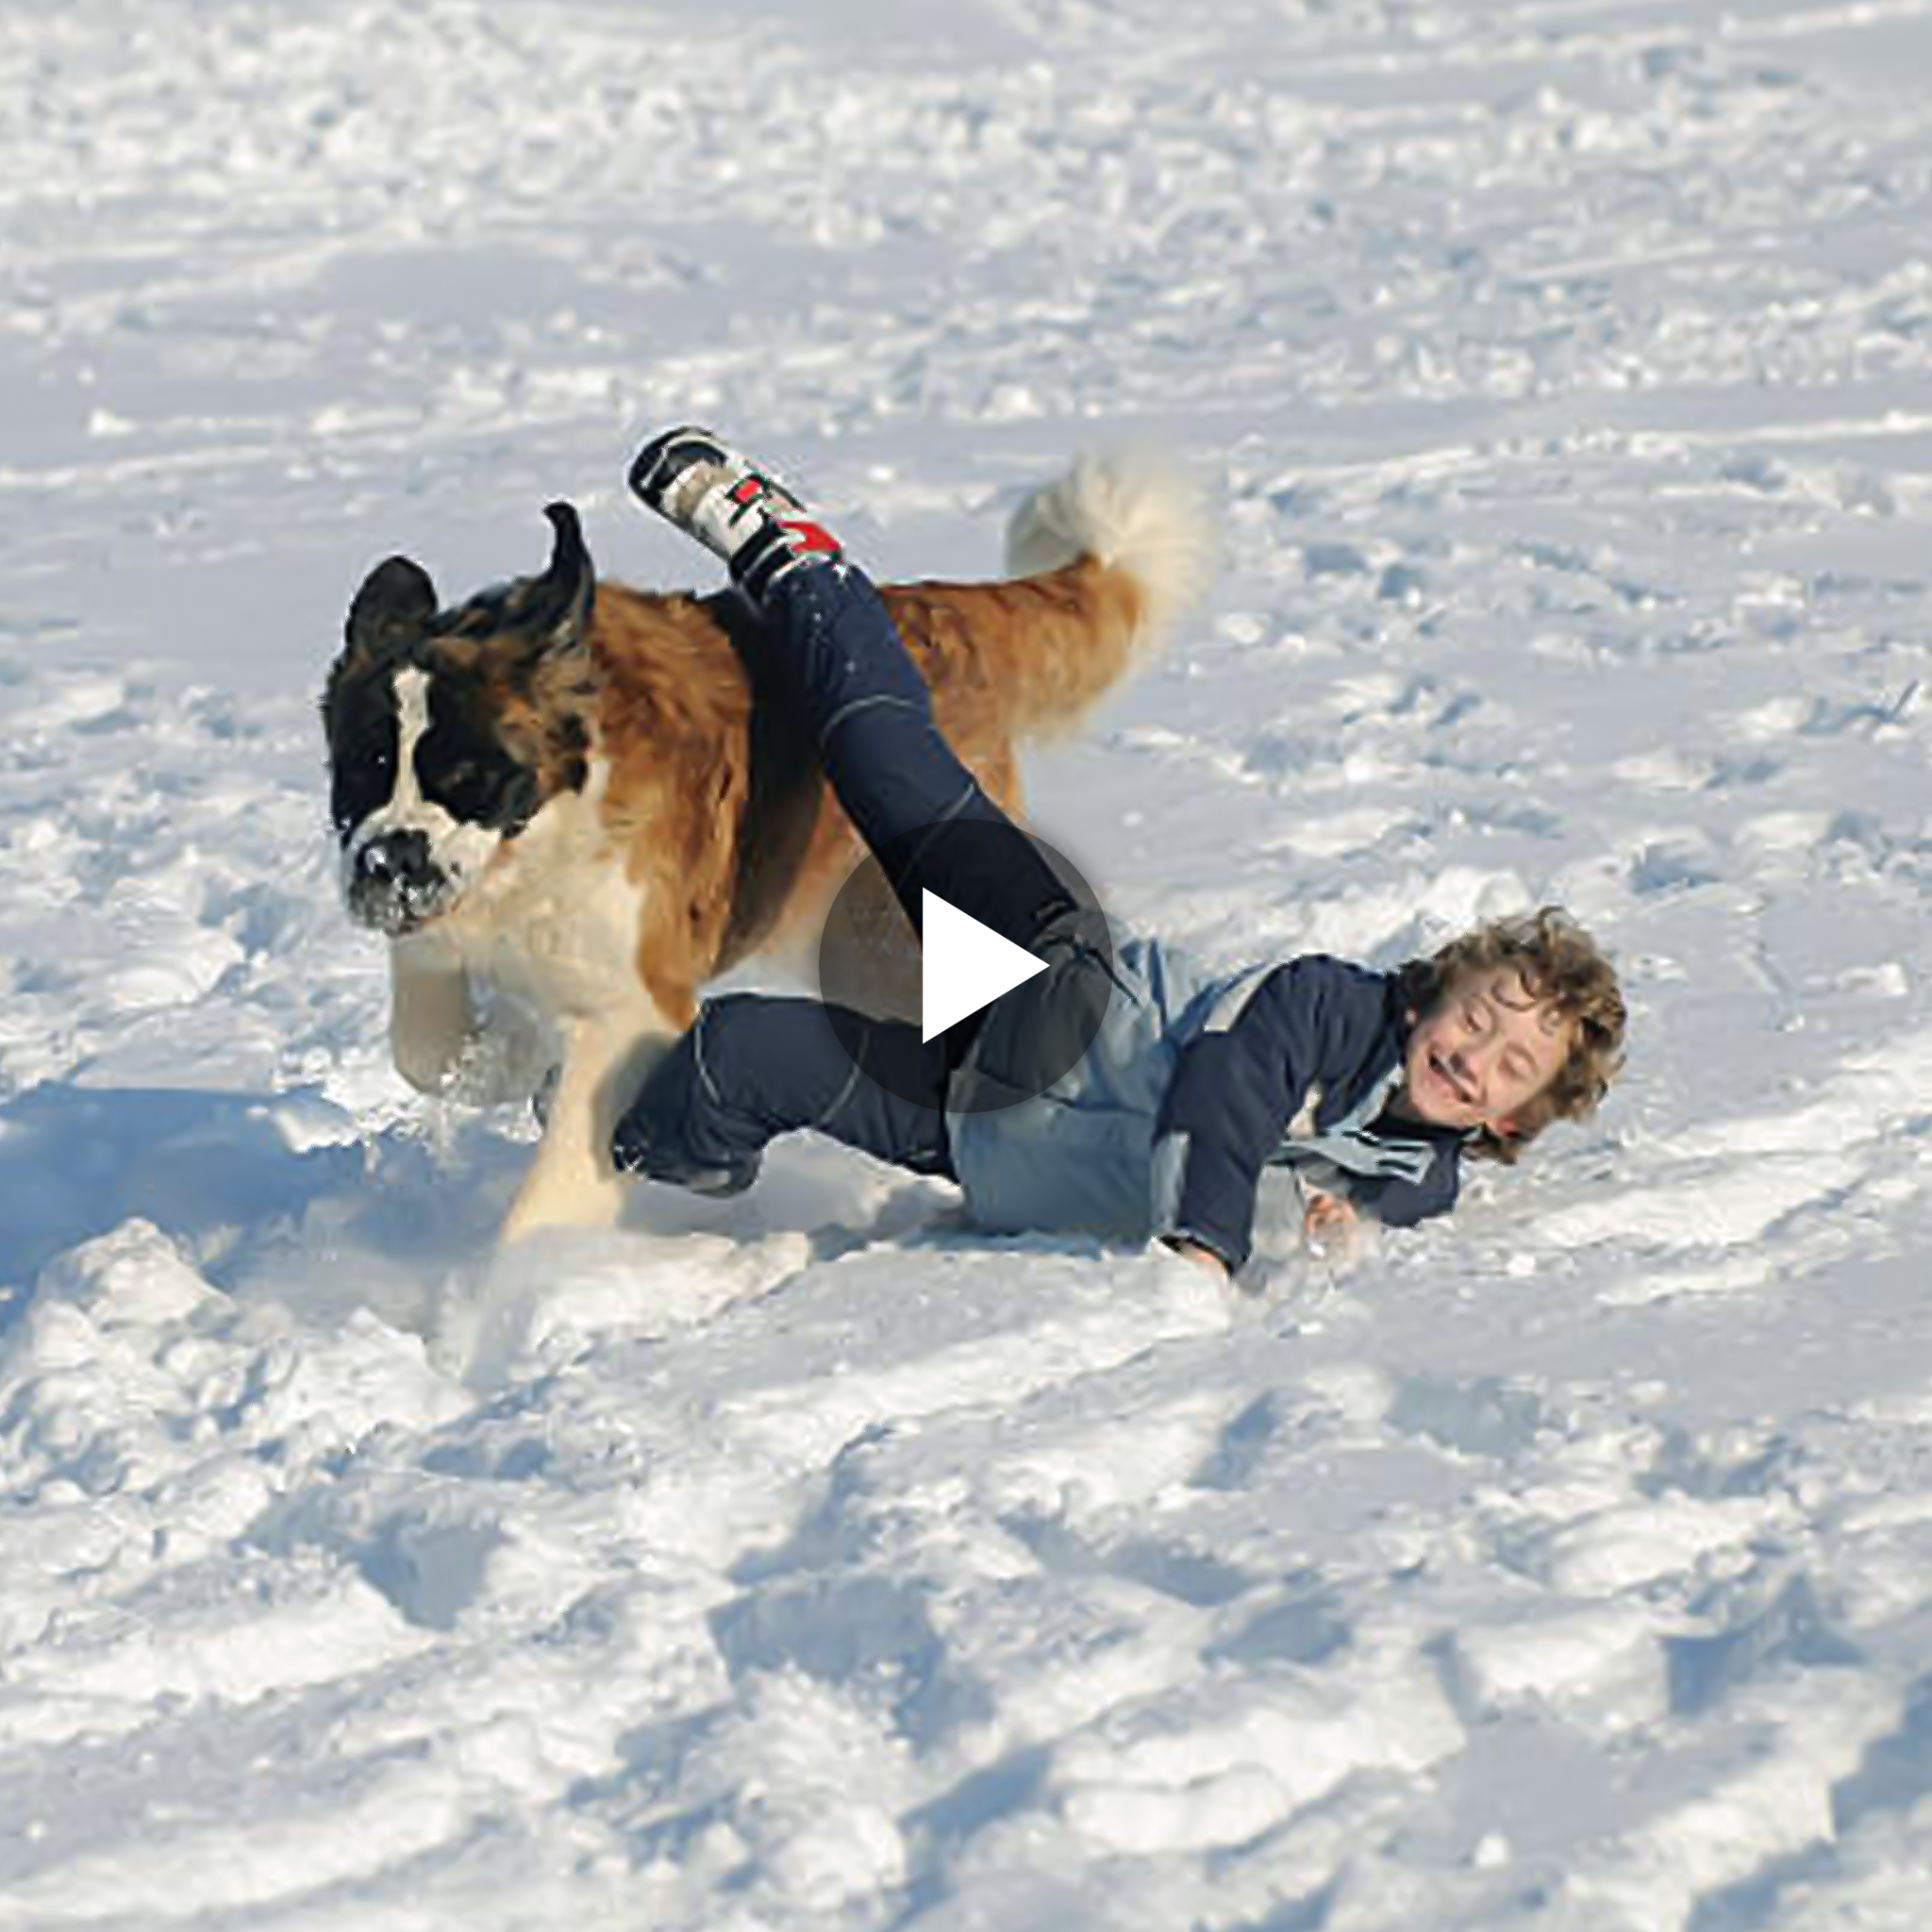 A snowy winter day is spent on a stroll of laughter and happiness between the boy and the giant, furry Saint Bernard. (VIDEO)